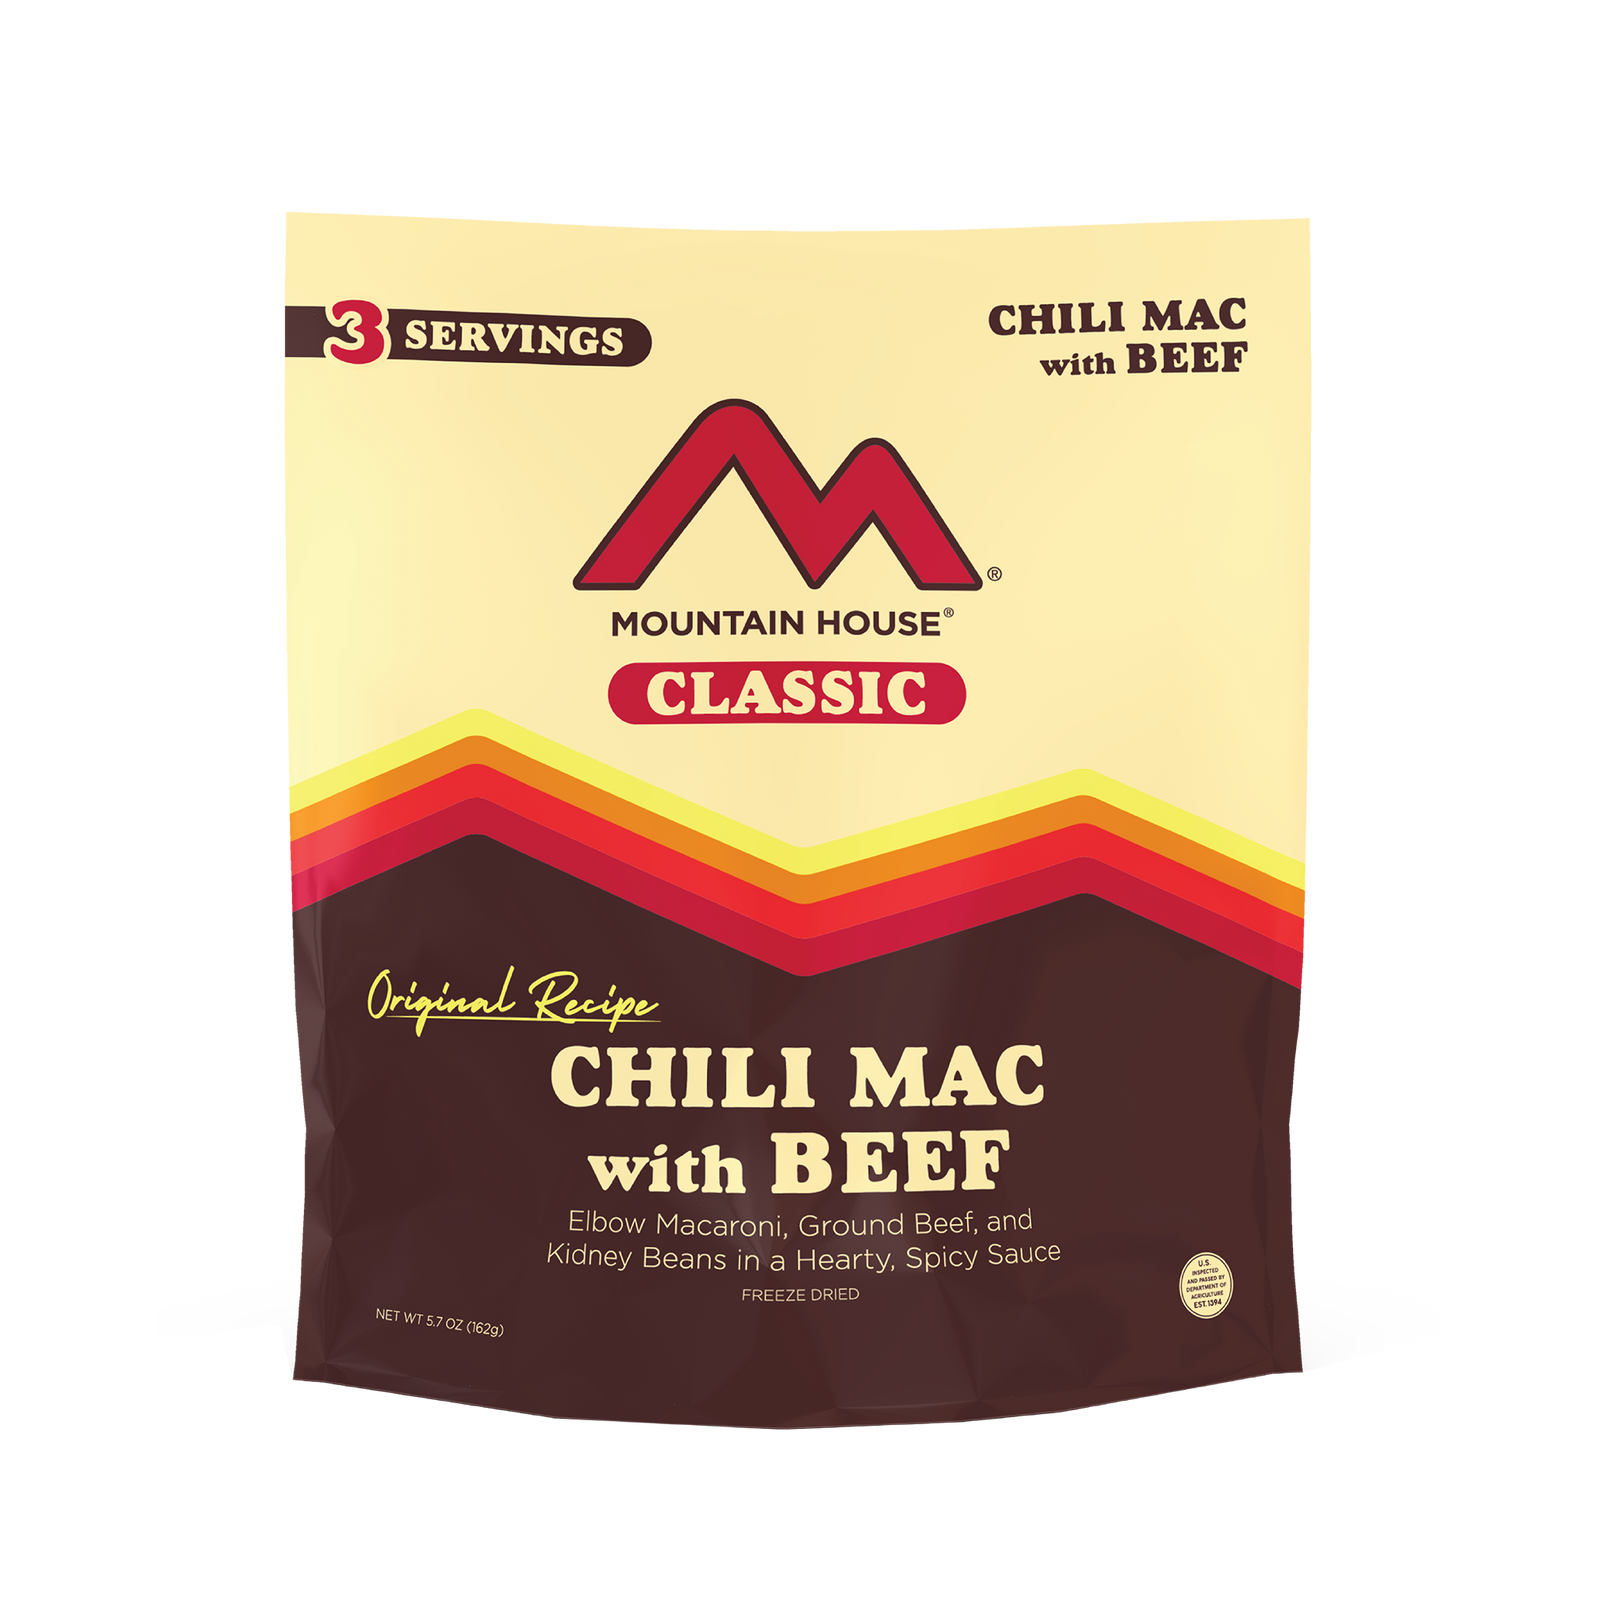 Classic Chili Mac with Beef